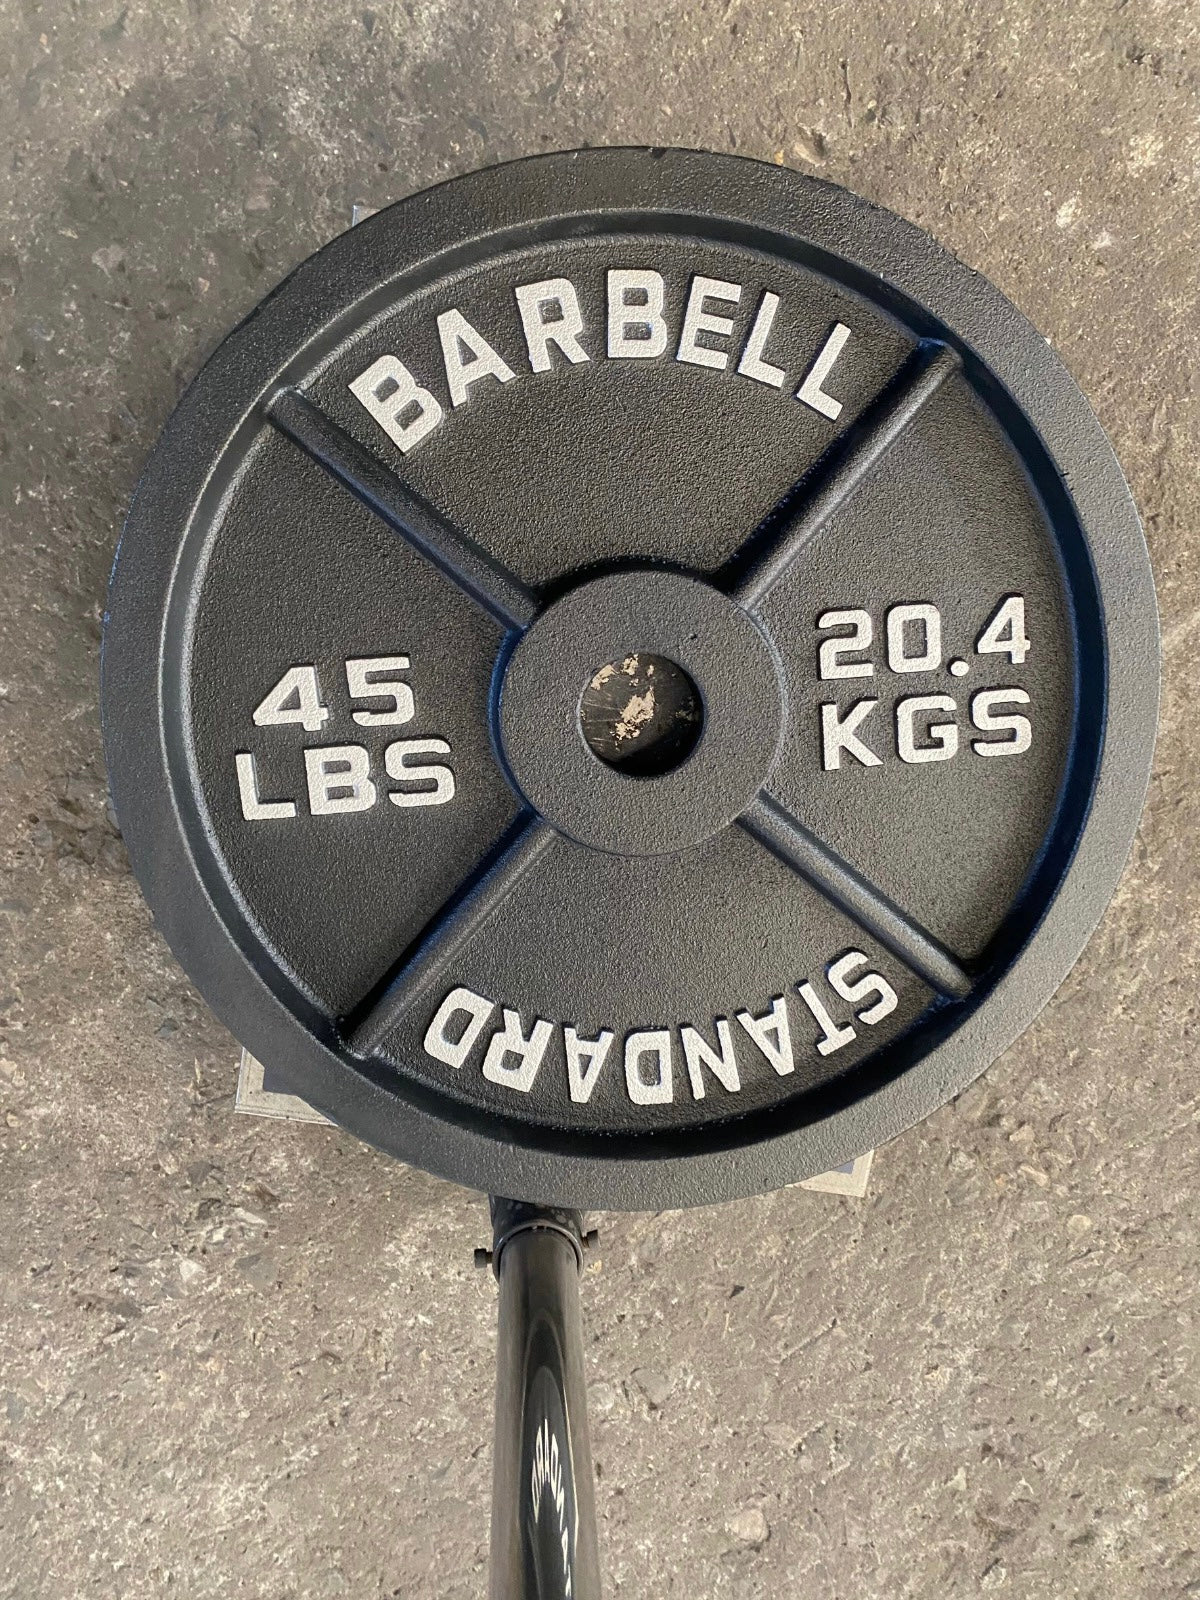 Olympic Cast Iron Weight Plate 245 lb set